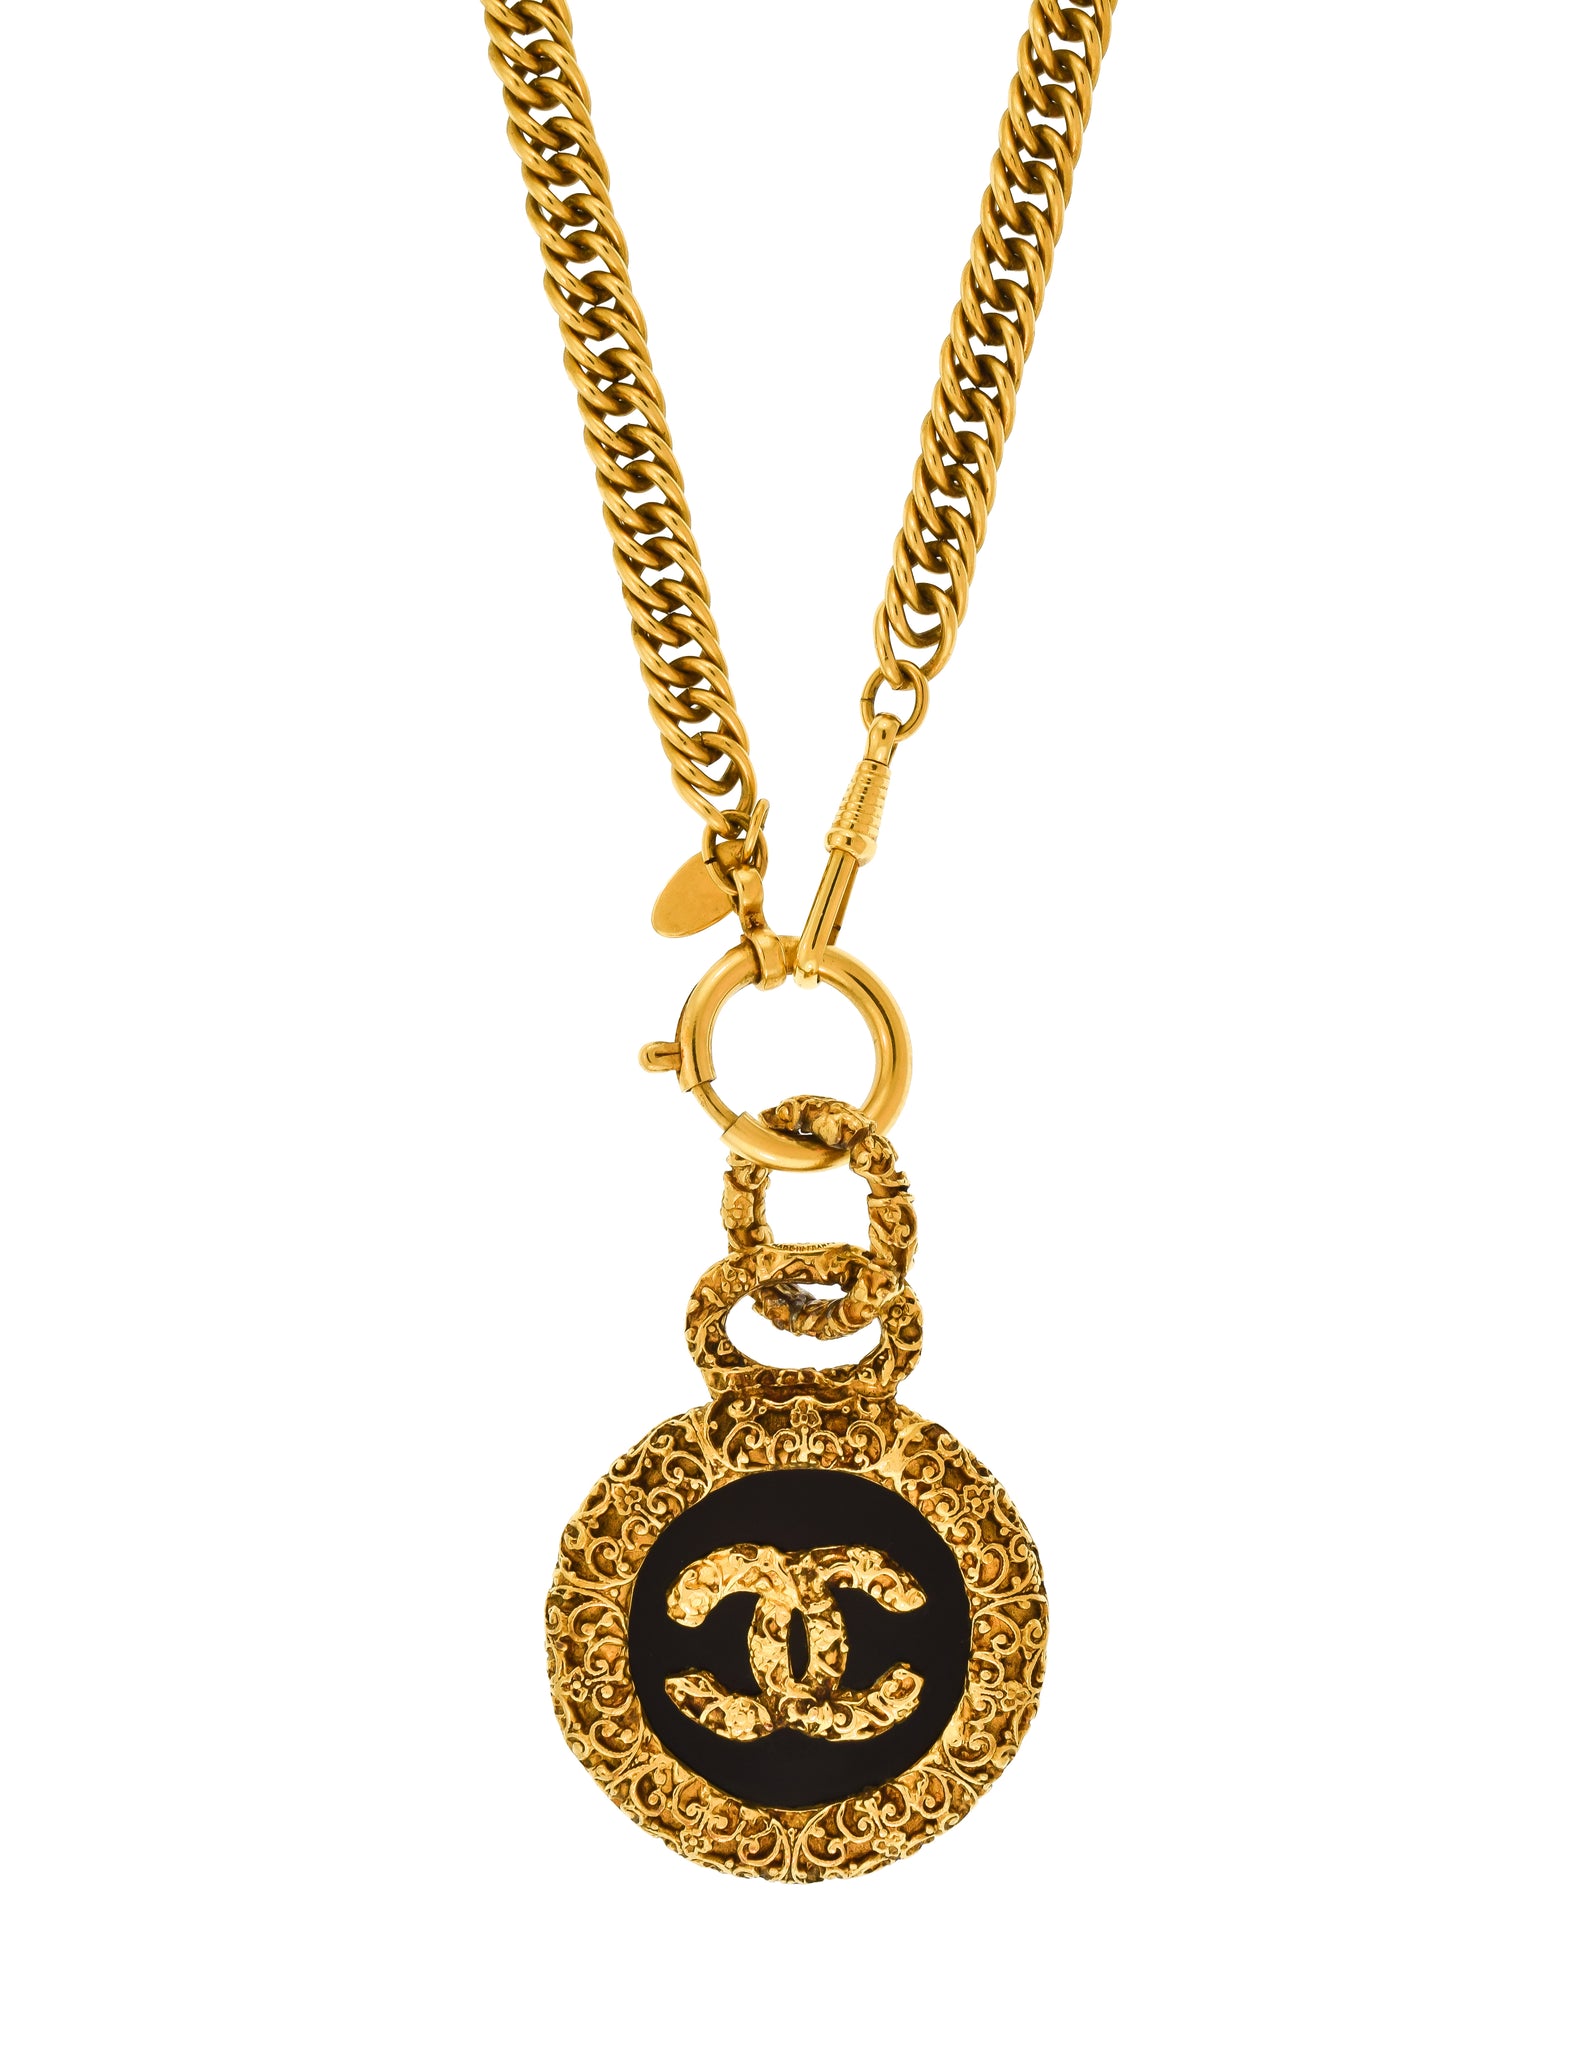 Chanel Vintage CC Pendant Necklace Gold Necklace Chanel Luxury High Quality